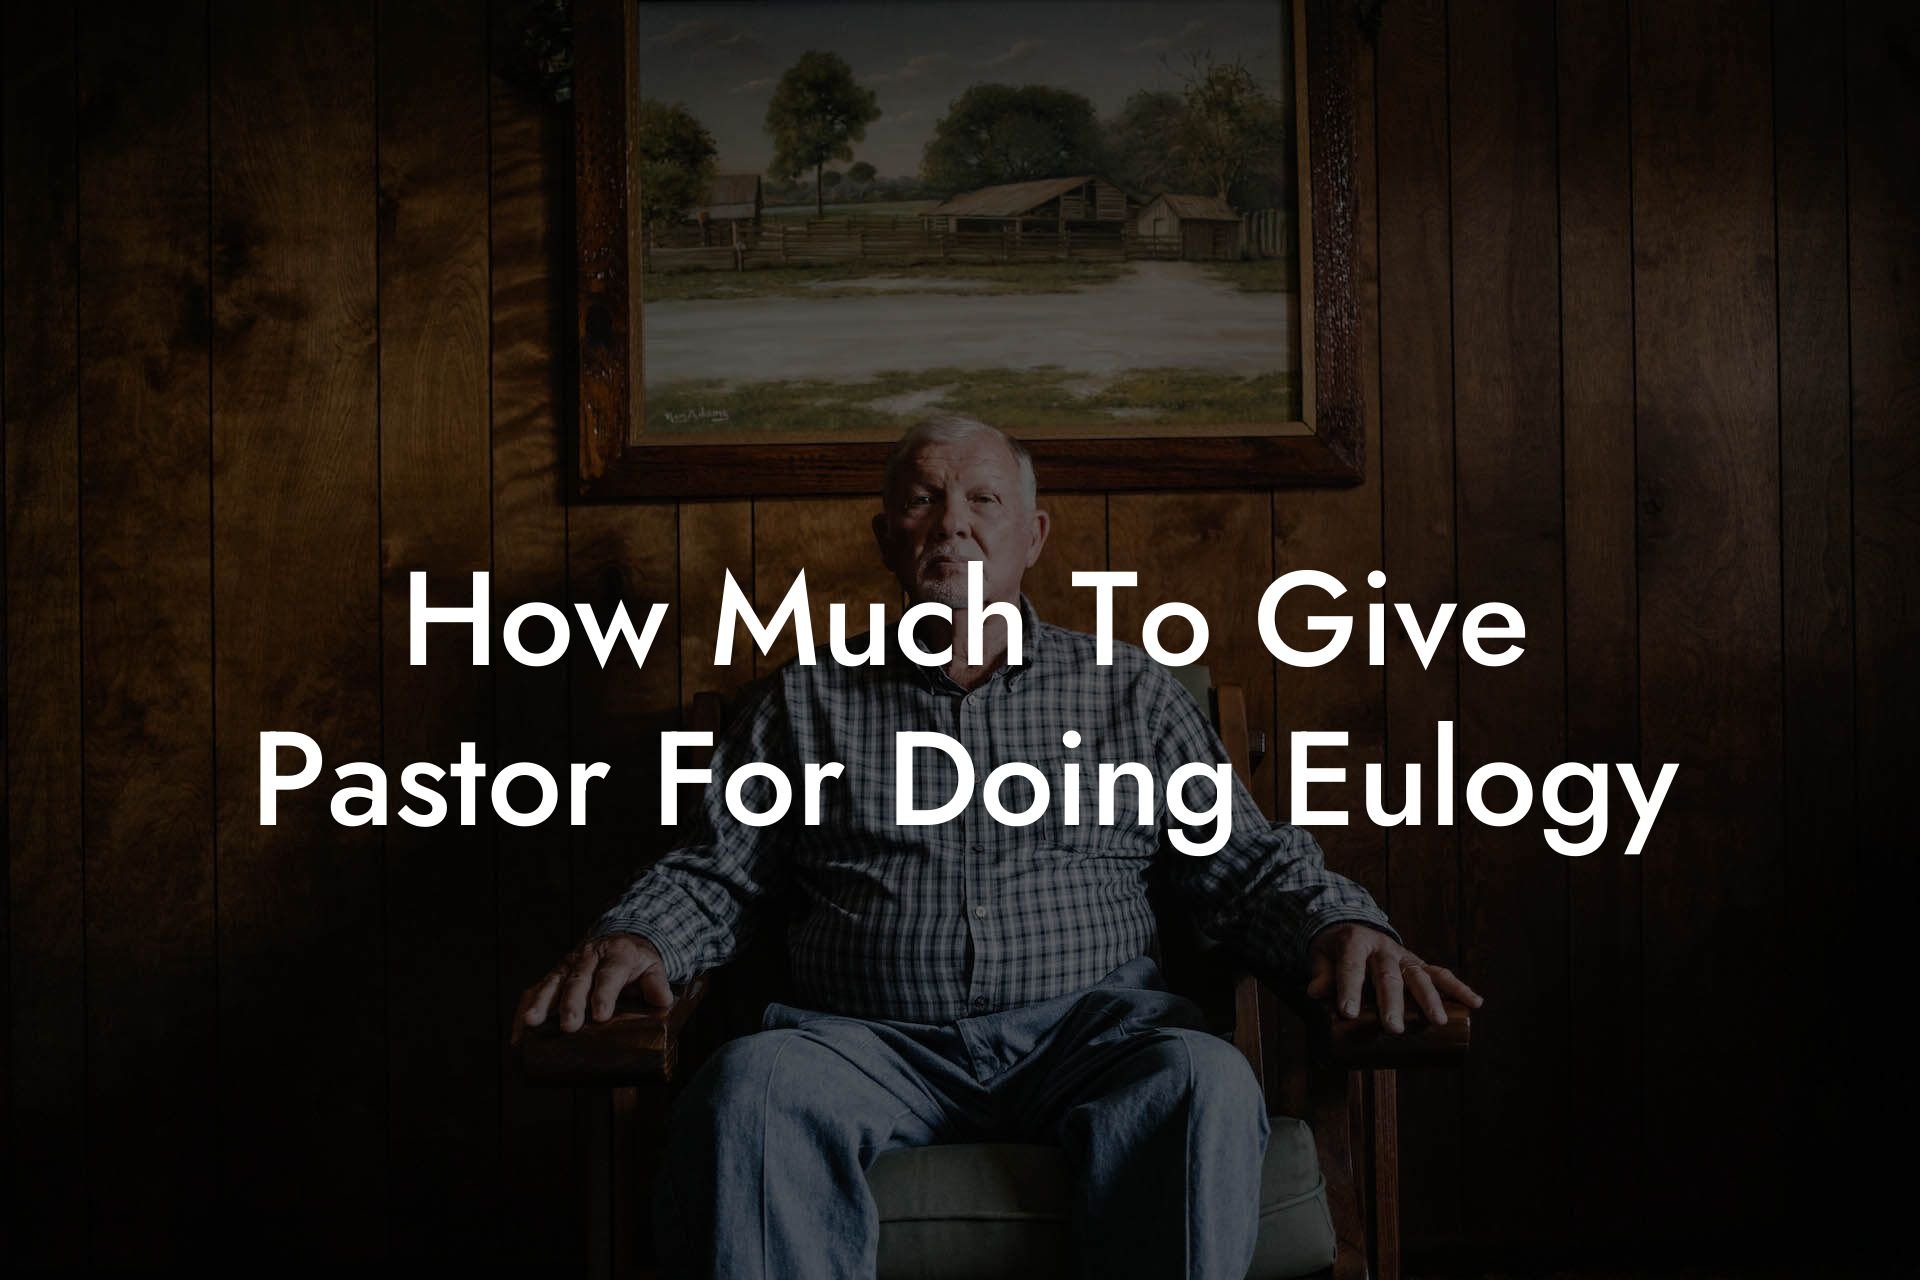 How Much To Give Pastor For Doing Eulogy